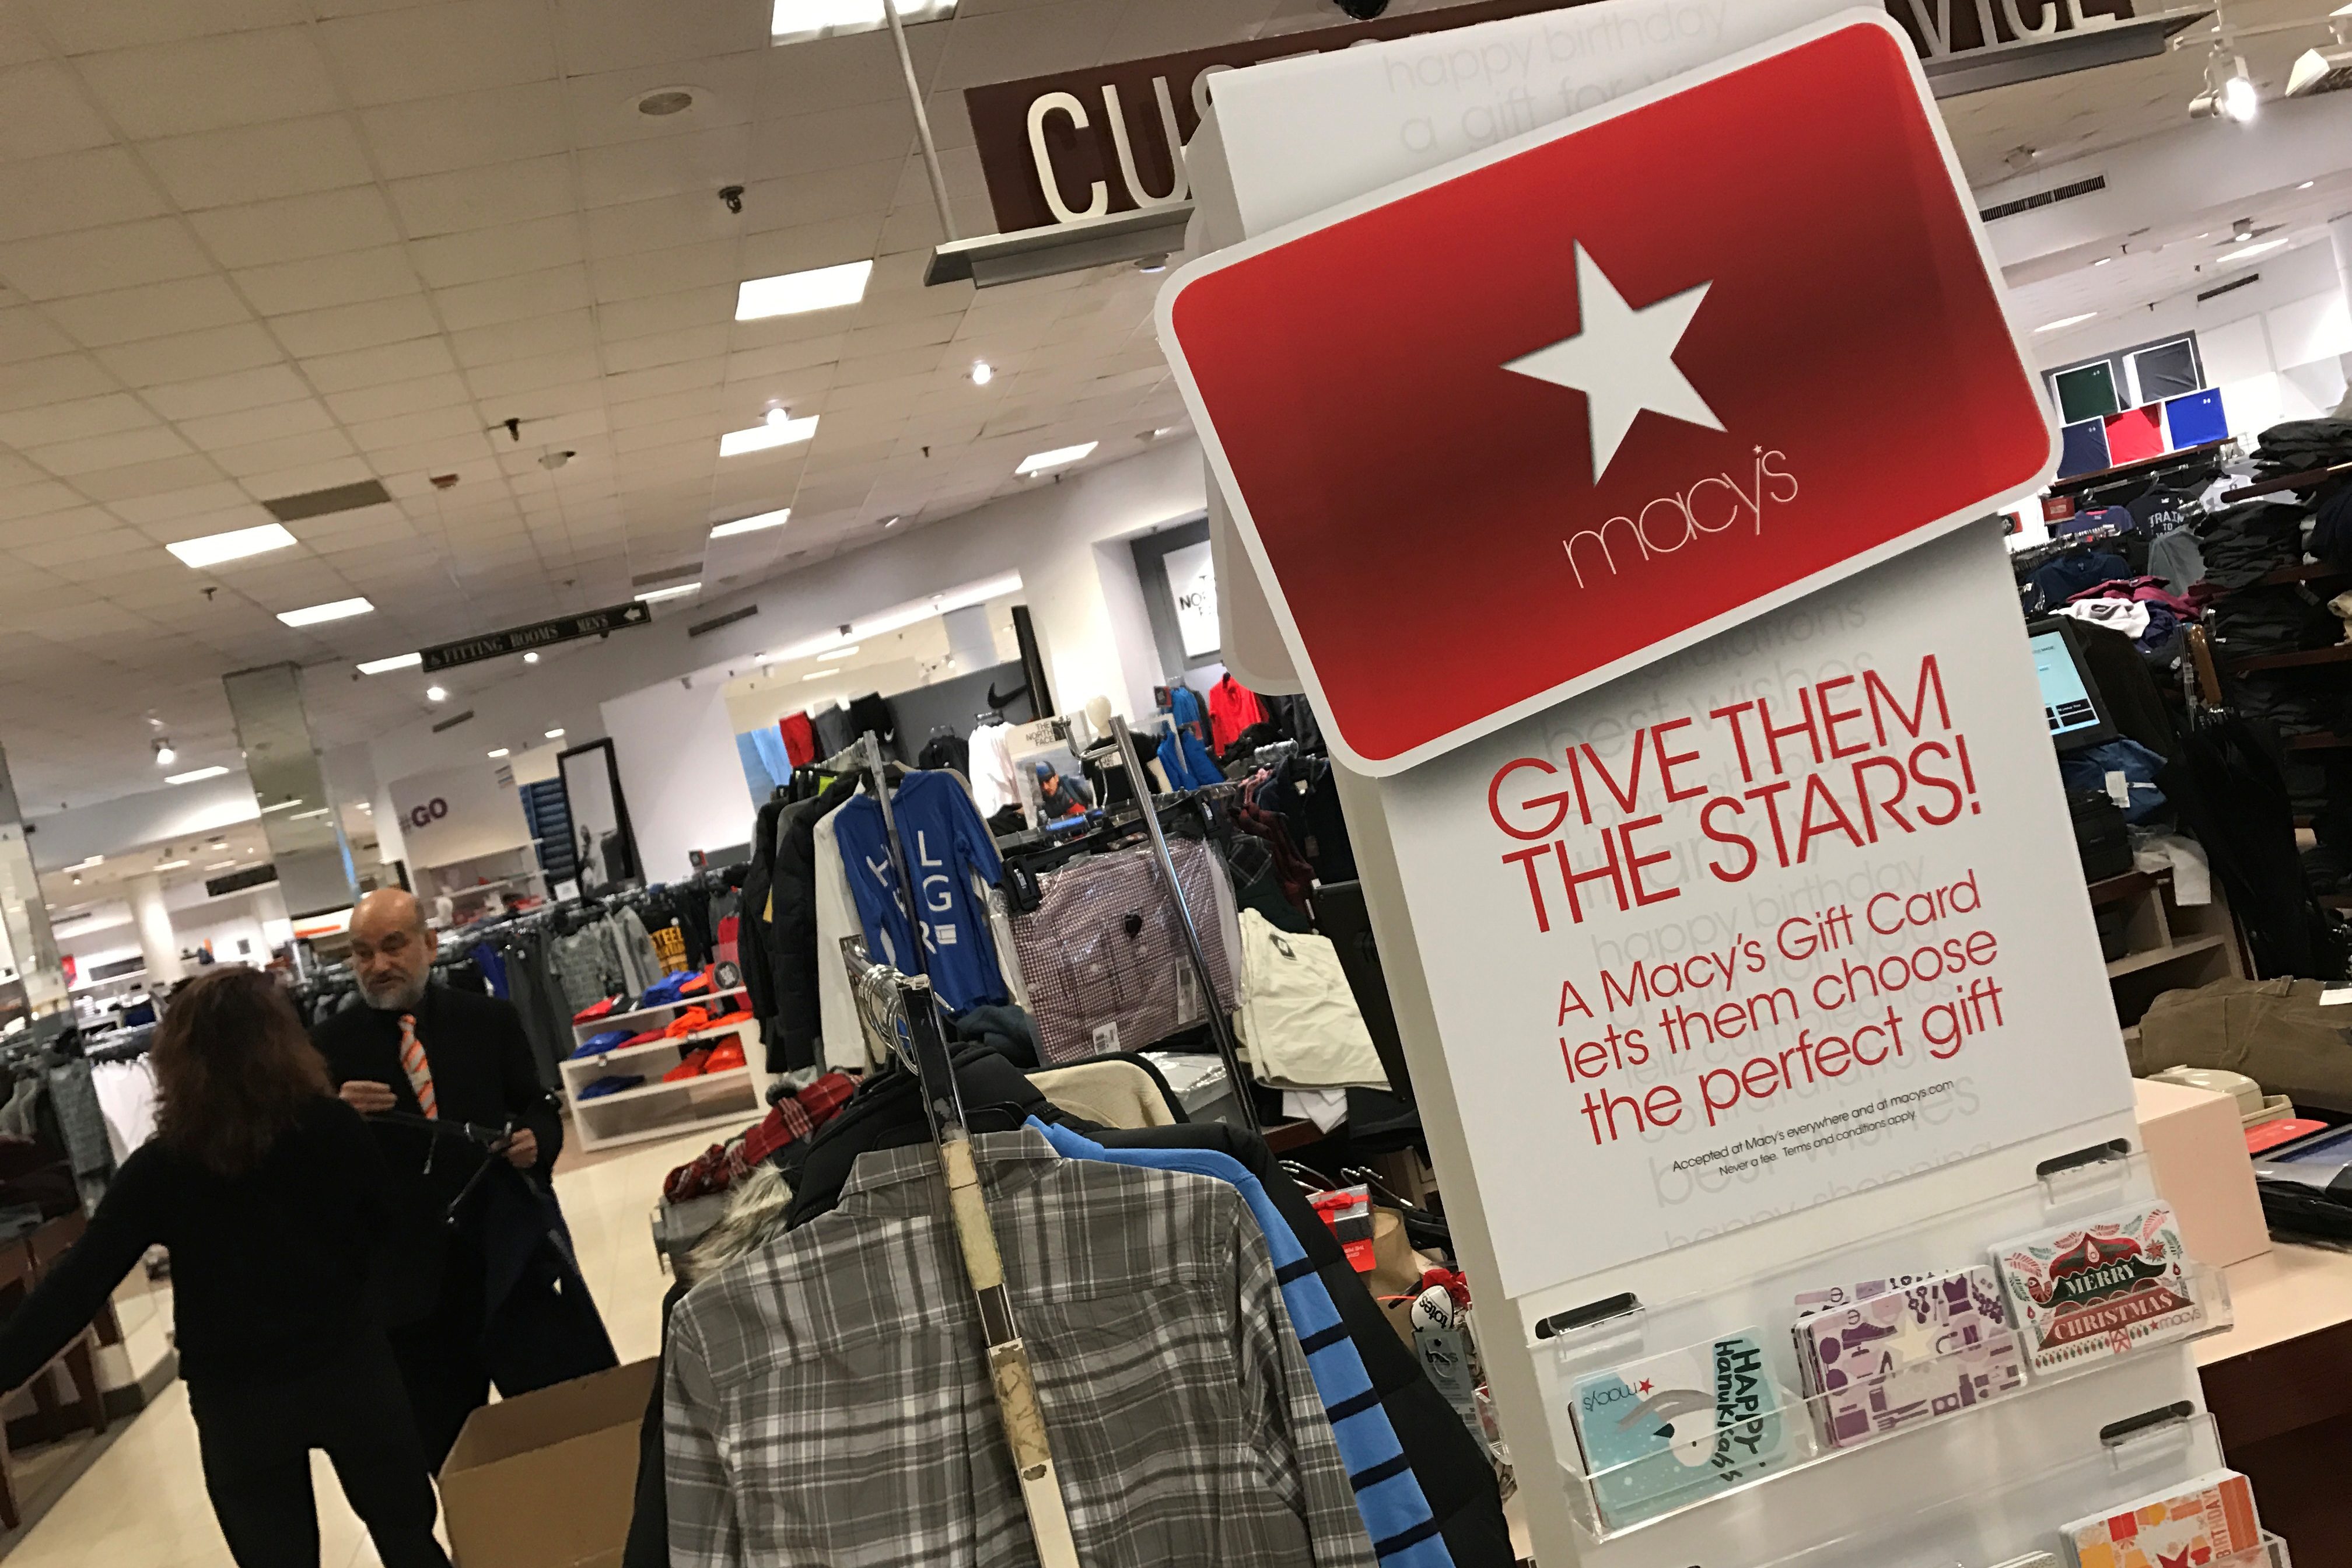 UPDATE: Nordstrom Rack opening festivities to be moved indoors due